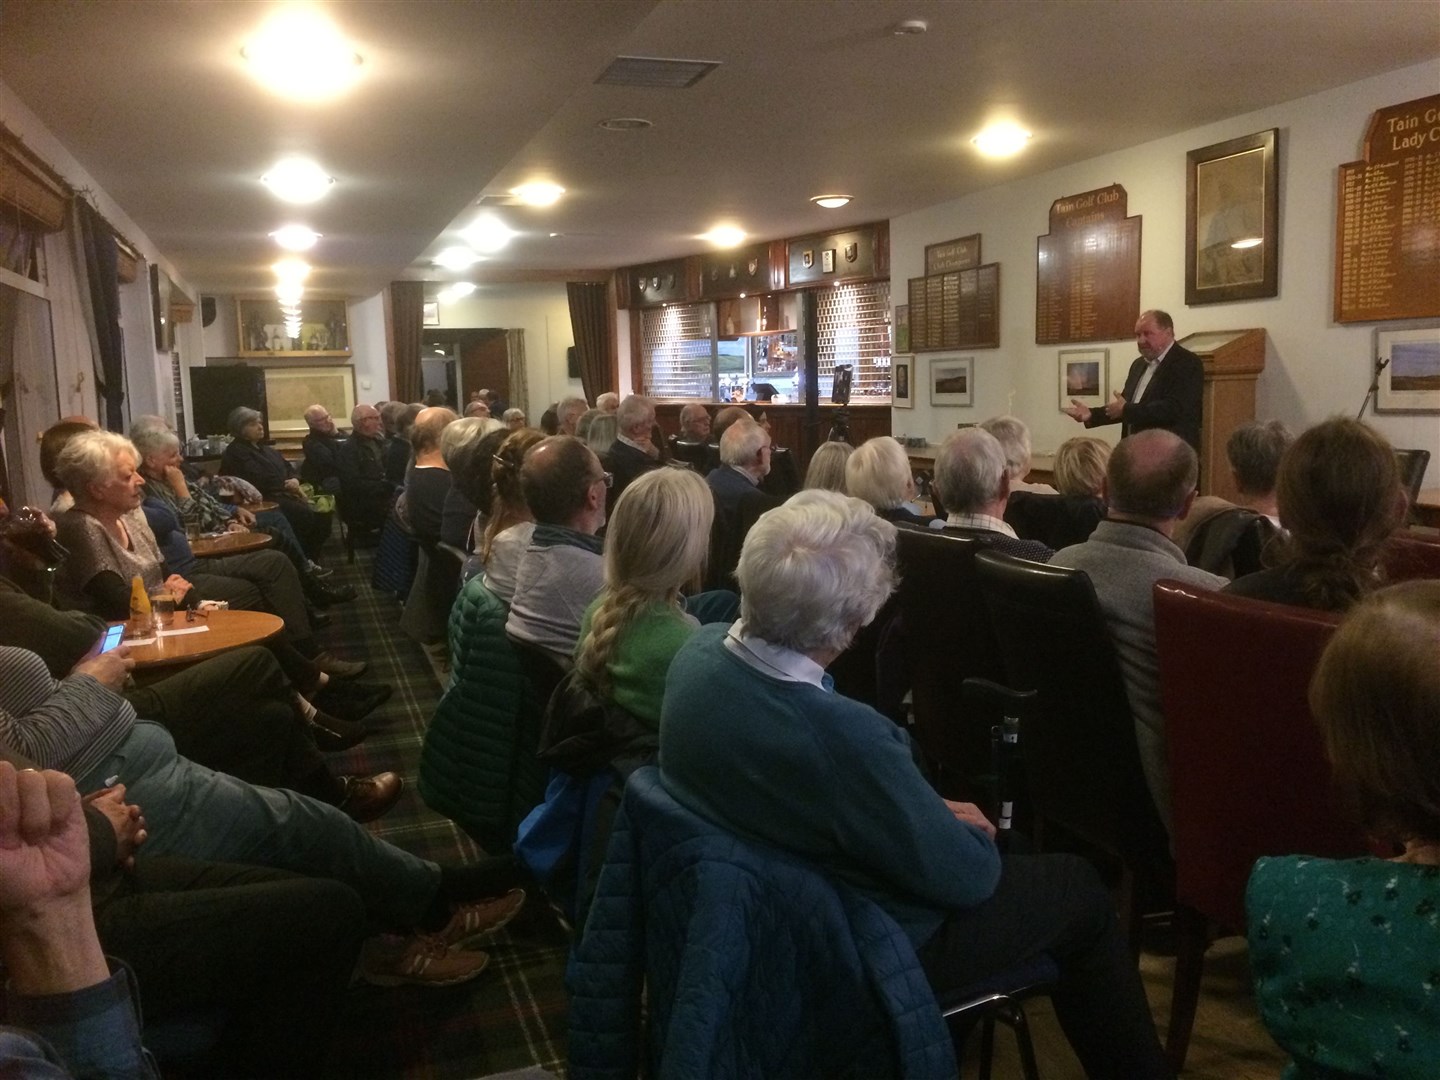 Broadcaster and writer James Naughtie with a sold out event at Tain Golf Club.